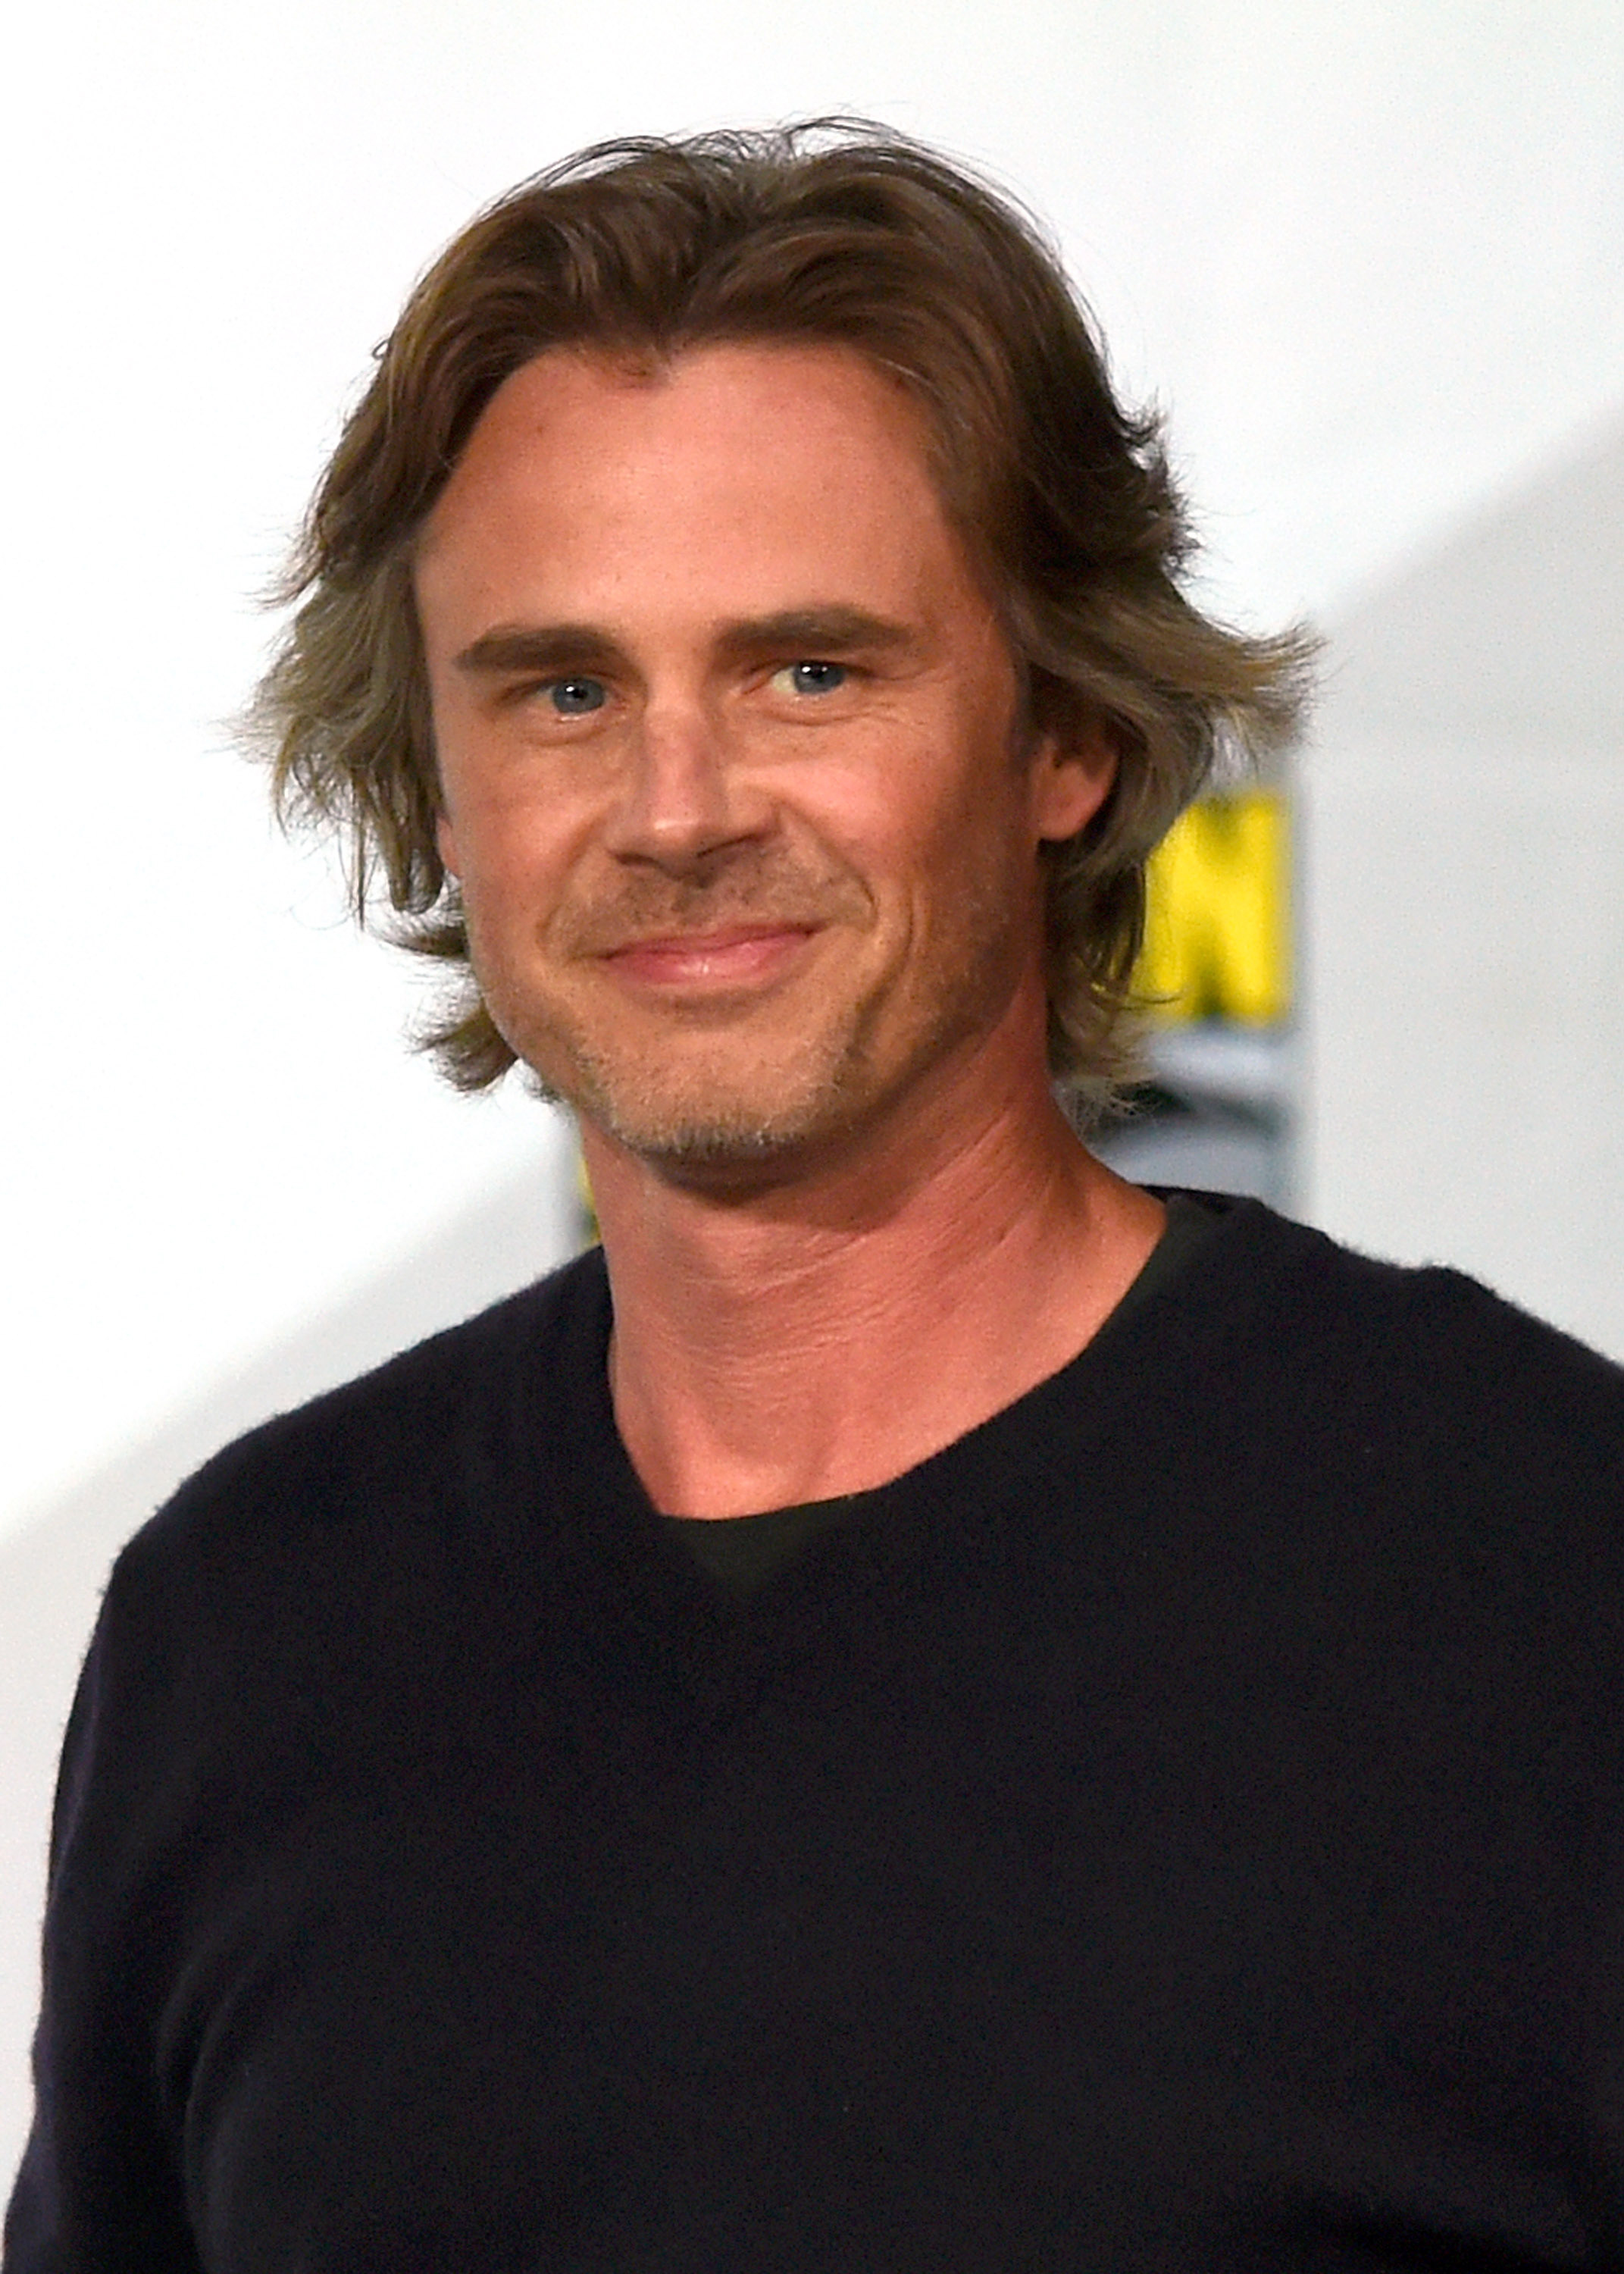 Actor Sam Trammell attends HBO's "True Blood" panel during Comic-Con International 2014 at the San Diego Convention Center on July 26, 2014 in San Diego, California. (Ethan Miller&mdash;Getty Images)